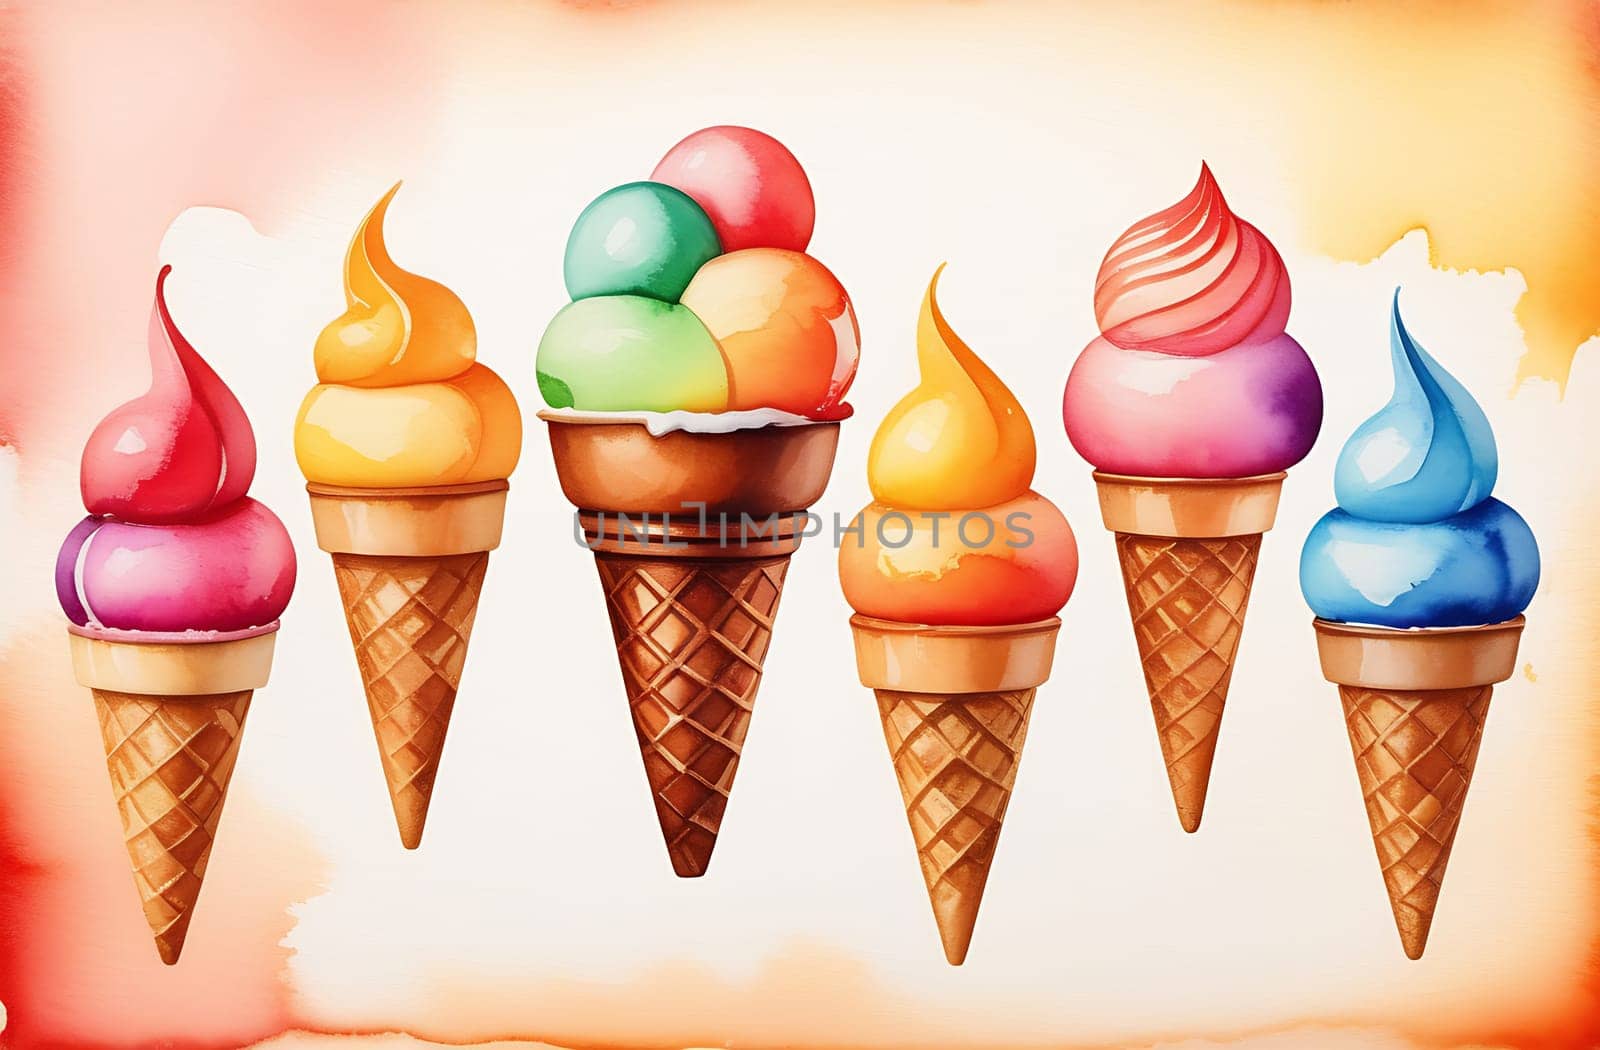 A set of watercolor waffle cones on a multicolored background by claire_lucia